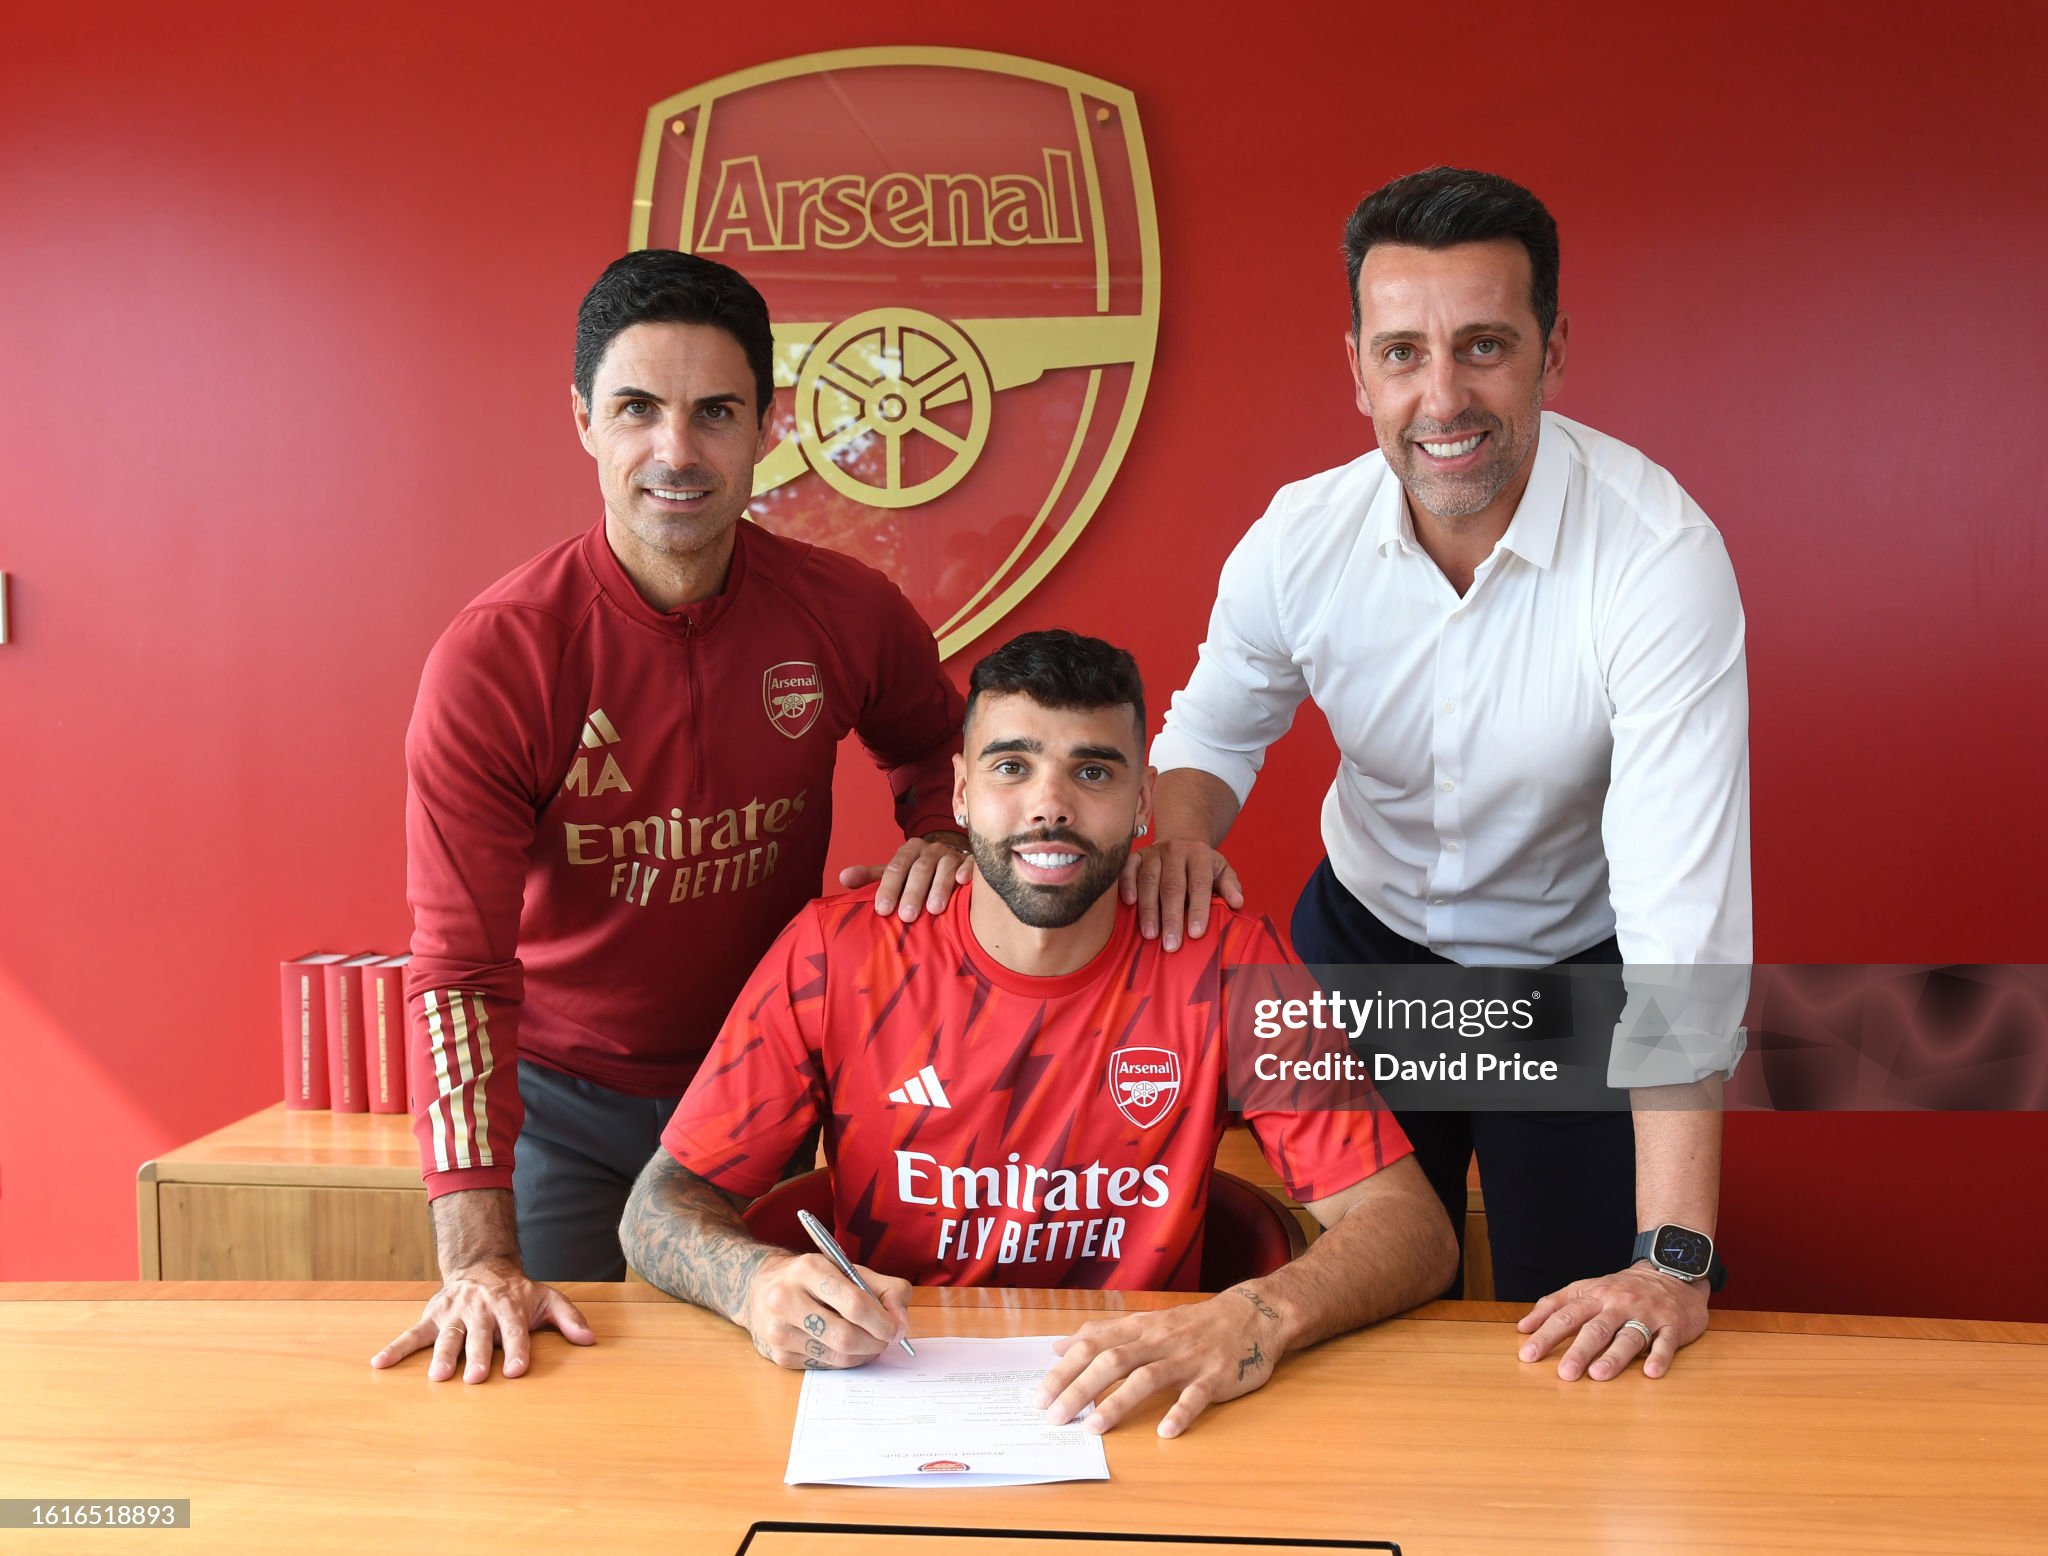 Arsenal complete signing of David Raya from Brentford